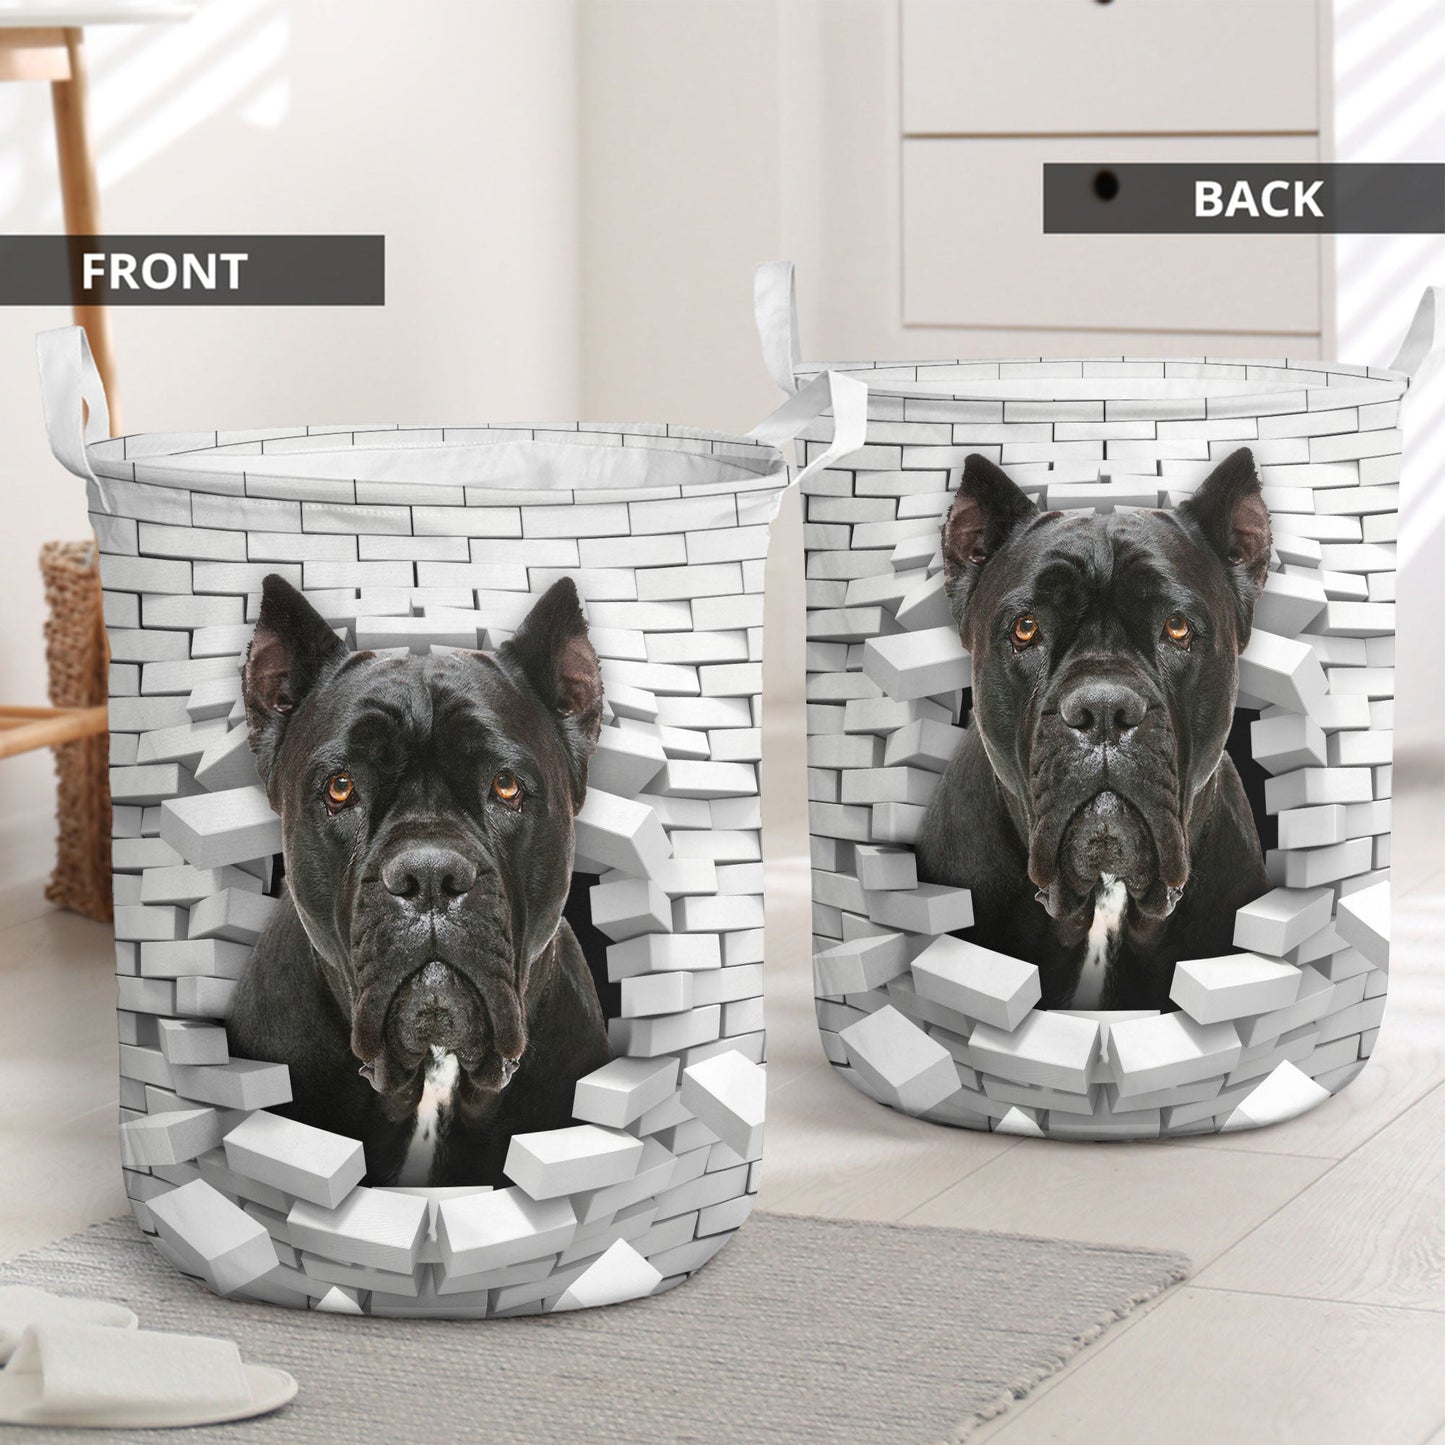 Cane Corso - In The Hole Of Wall Pattern Laundry Basket